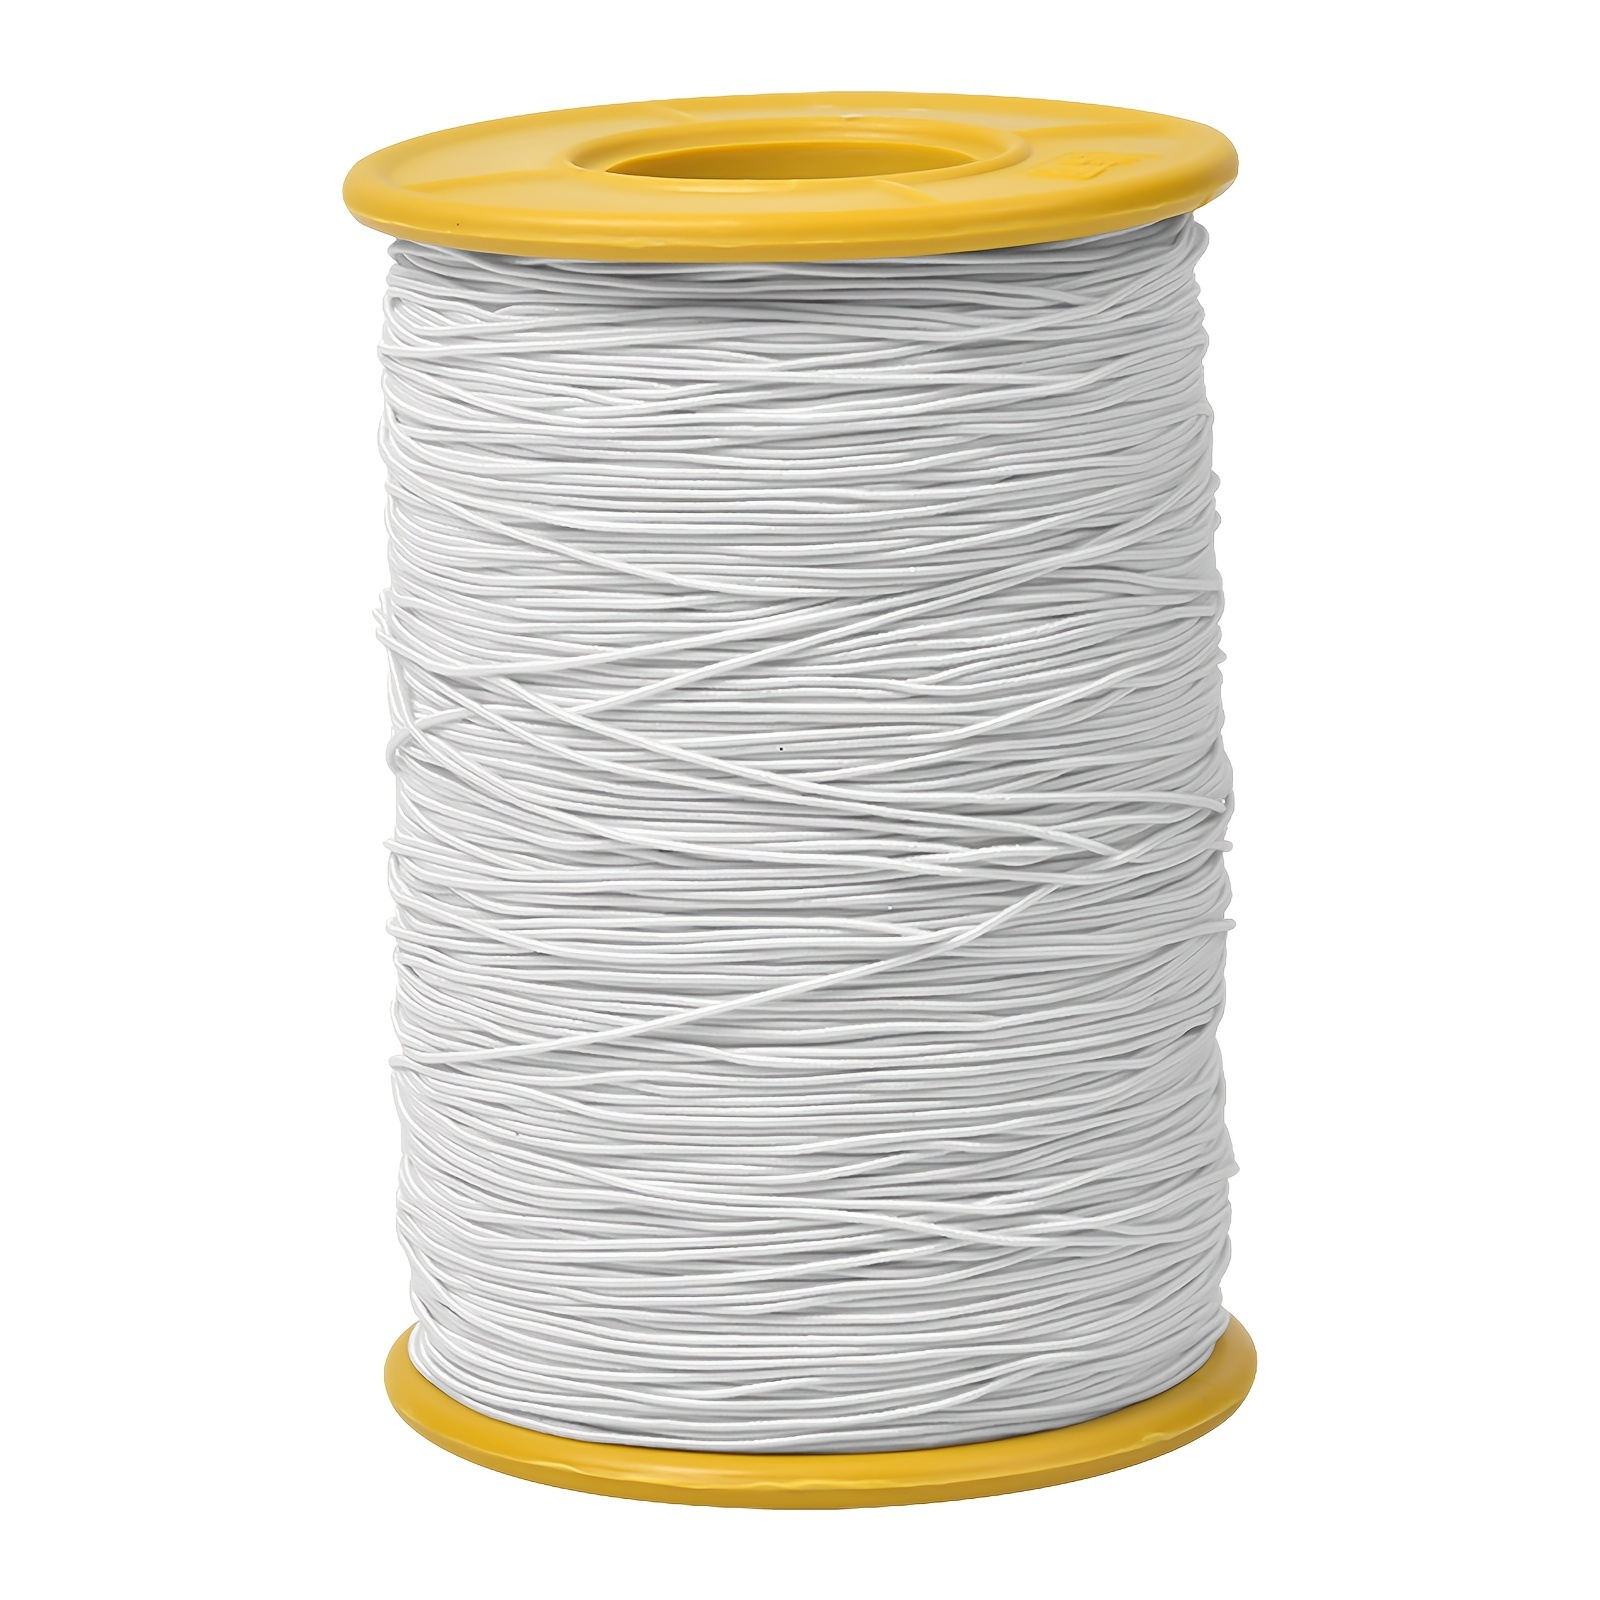 95meters/Roll 0.8mm Nylon Cords Beading Thread String For Diy